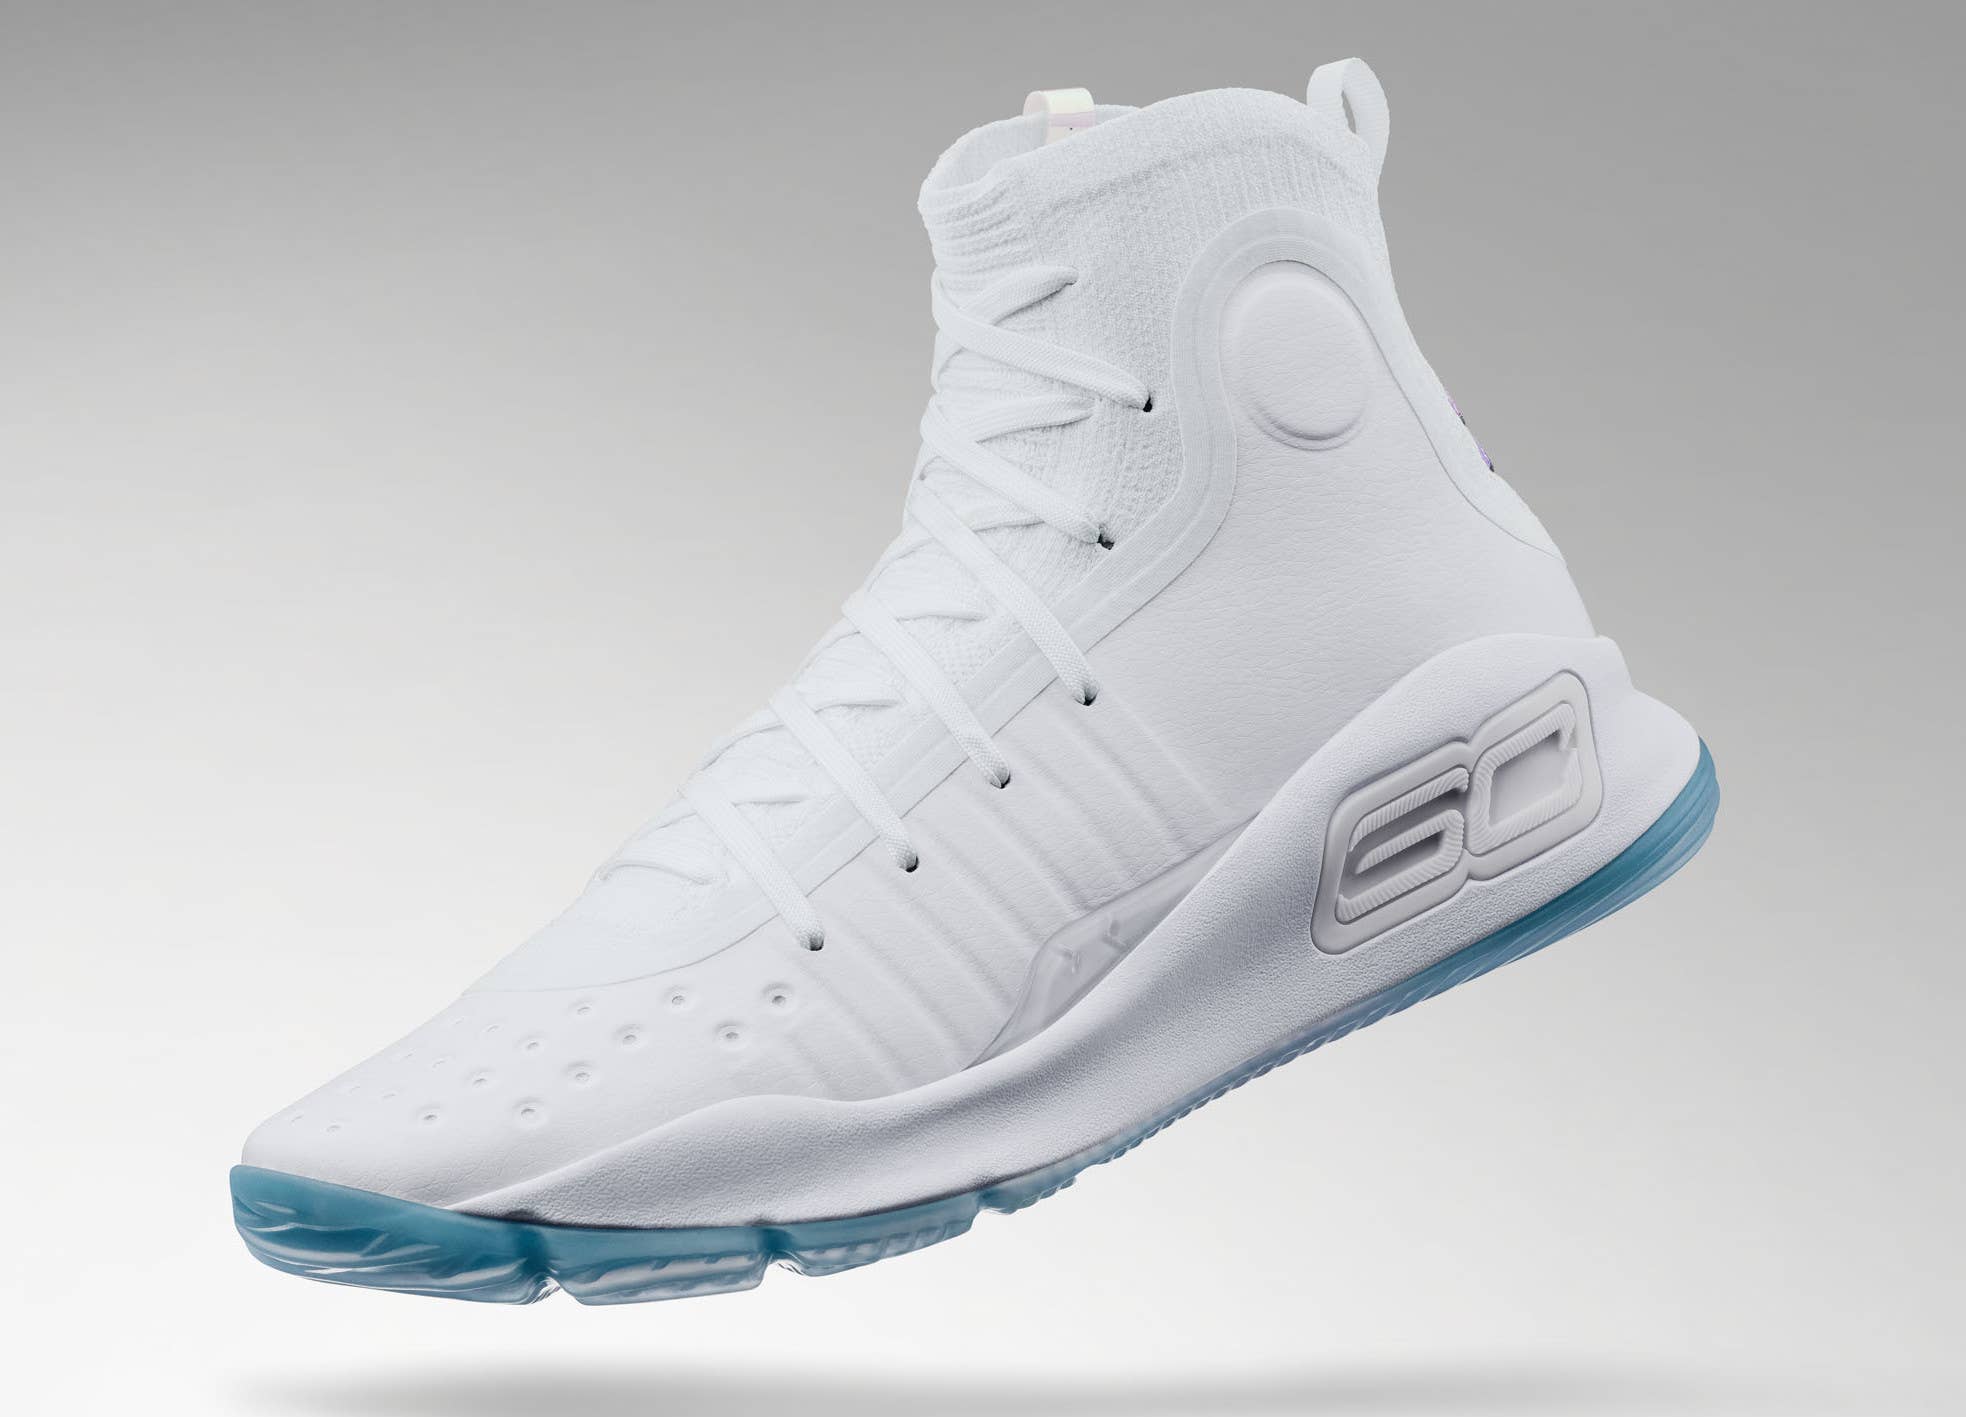 Under Armour Curry 4 'All Star' 1298306 108 1